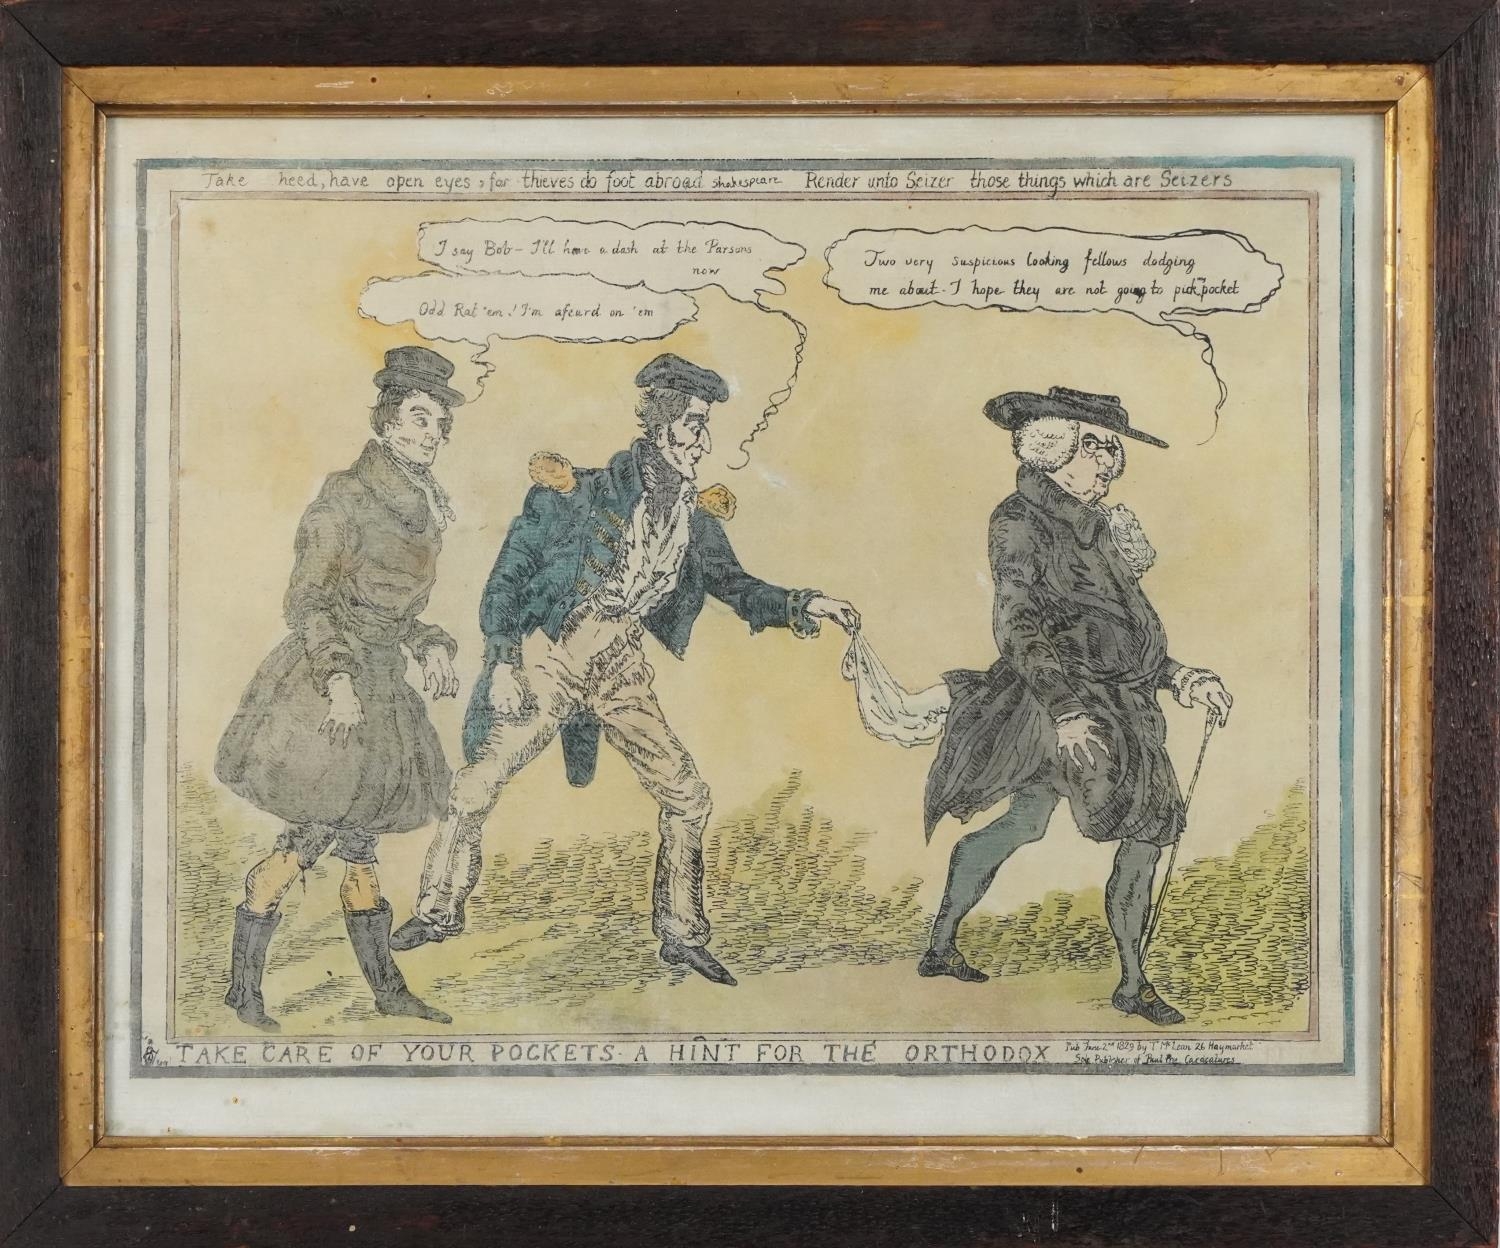 Take Heed, Have Open Eyes to Thieves, hand coloured political cartoon, Do Not Do Foot Abroad, framed - Image 2 of 5